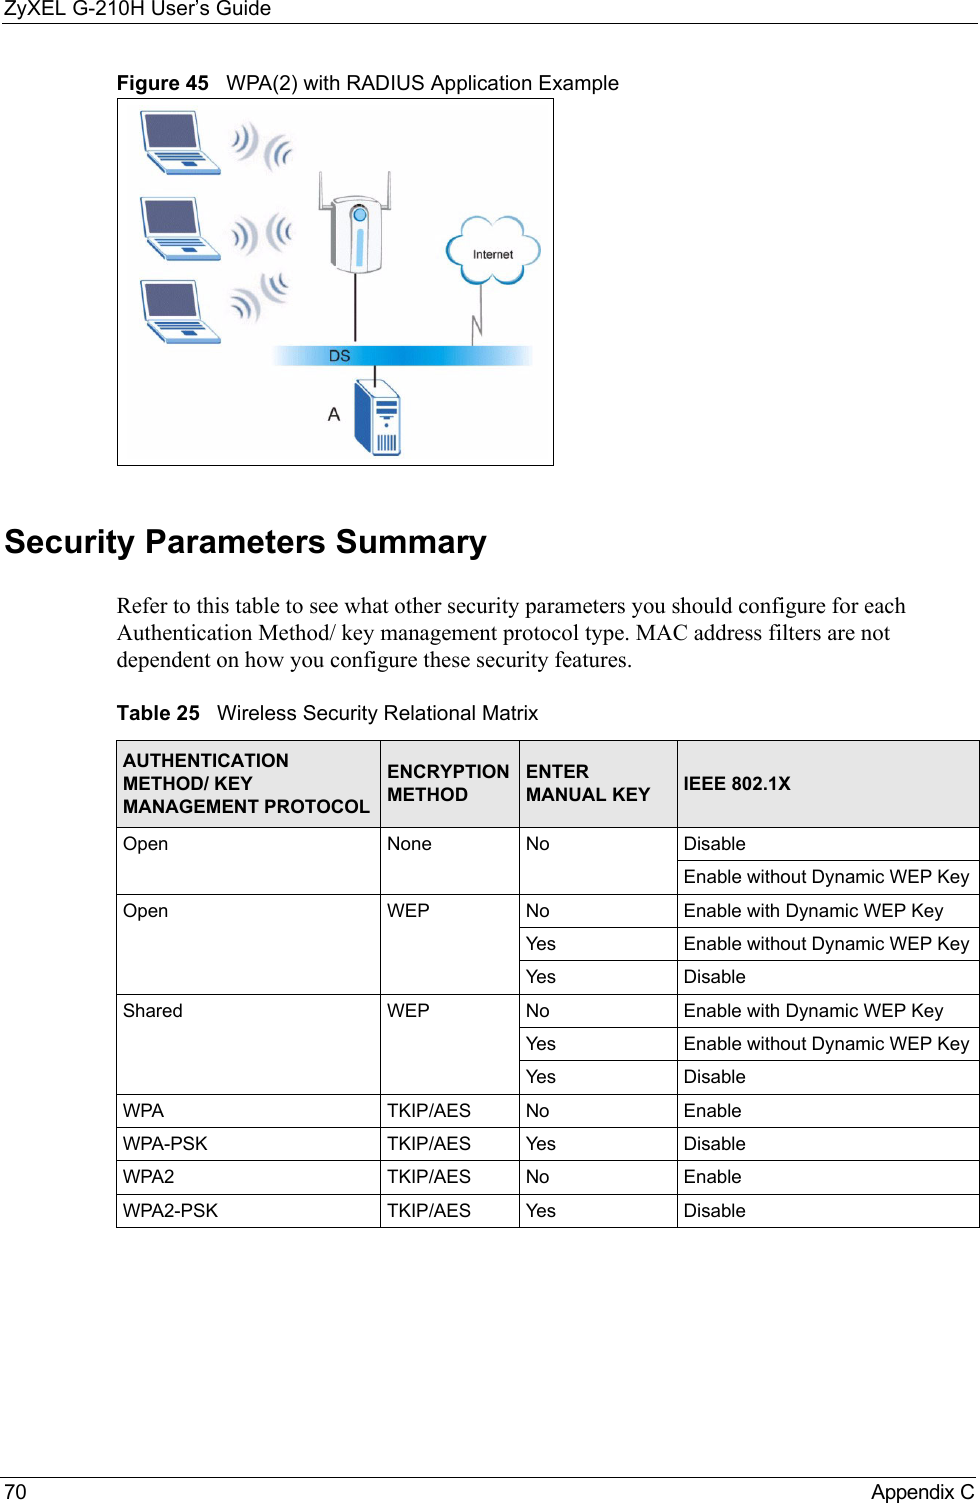 ZyXEL G-210H User’s Guide70 Appendix CFigure 45   WPA(2) with RADIUS Application ExampleSecurity Parameters SummaryRefer to this table to see what other security parameters you should configure for each Authentication Method/ key management protocol type. MAC address filters are not dependent on how you configure these security features.Table 25   Wireless Security Relational MatrixAUTHENTICATION METHOD/ KEY MANAGEMENT PROTOCOLENCRYPTION METHODENTER MANUAL KEY IEEE 802.1XOpen None No DisableEnable without Dynamic WEP KeyOpen WEP No           Enable with Dynamic WEP KeyYes Enable without Dynamic WEP KeyYes DisableShared WEP  No           Enable with Dynamic WEP KeyYes Enable without Dynamic WEP KeyYes DisableWPA  TKIP/AES No EnableWPA-PSK  TKIP/AES Yes DisableWPA2 TKIP/AES No EnableWPA2-PSK  TKIP/AES Yes Disable